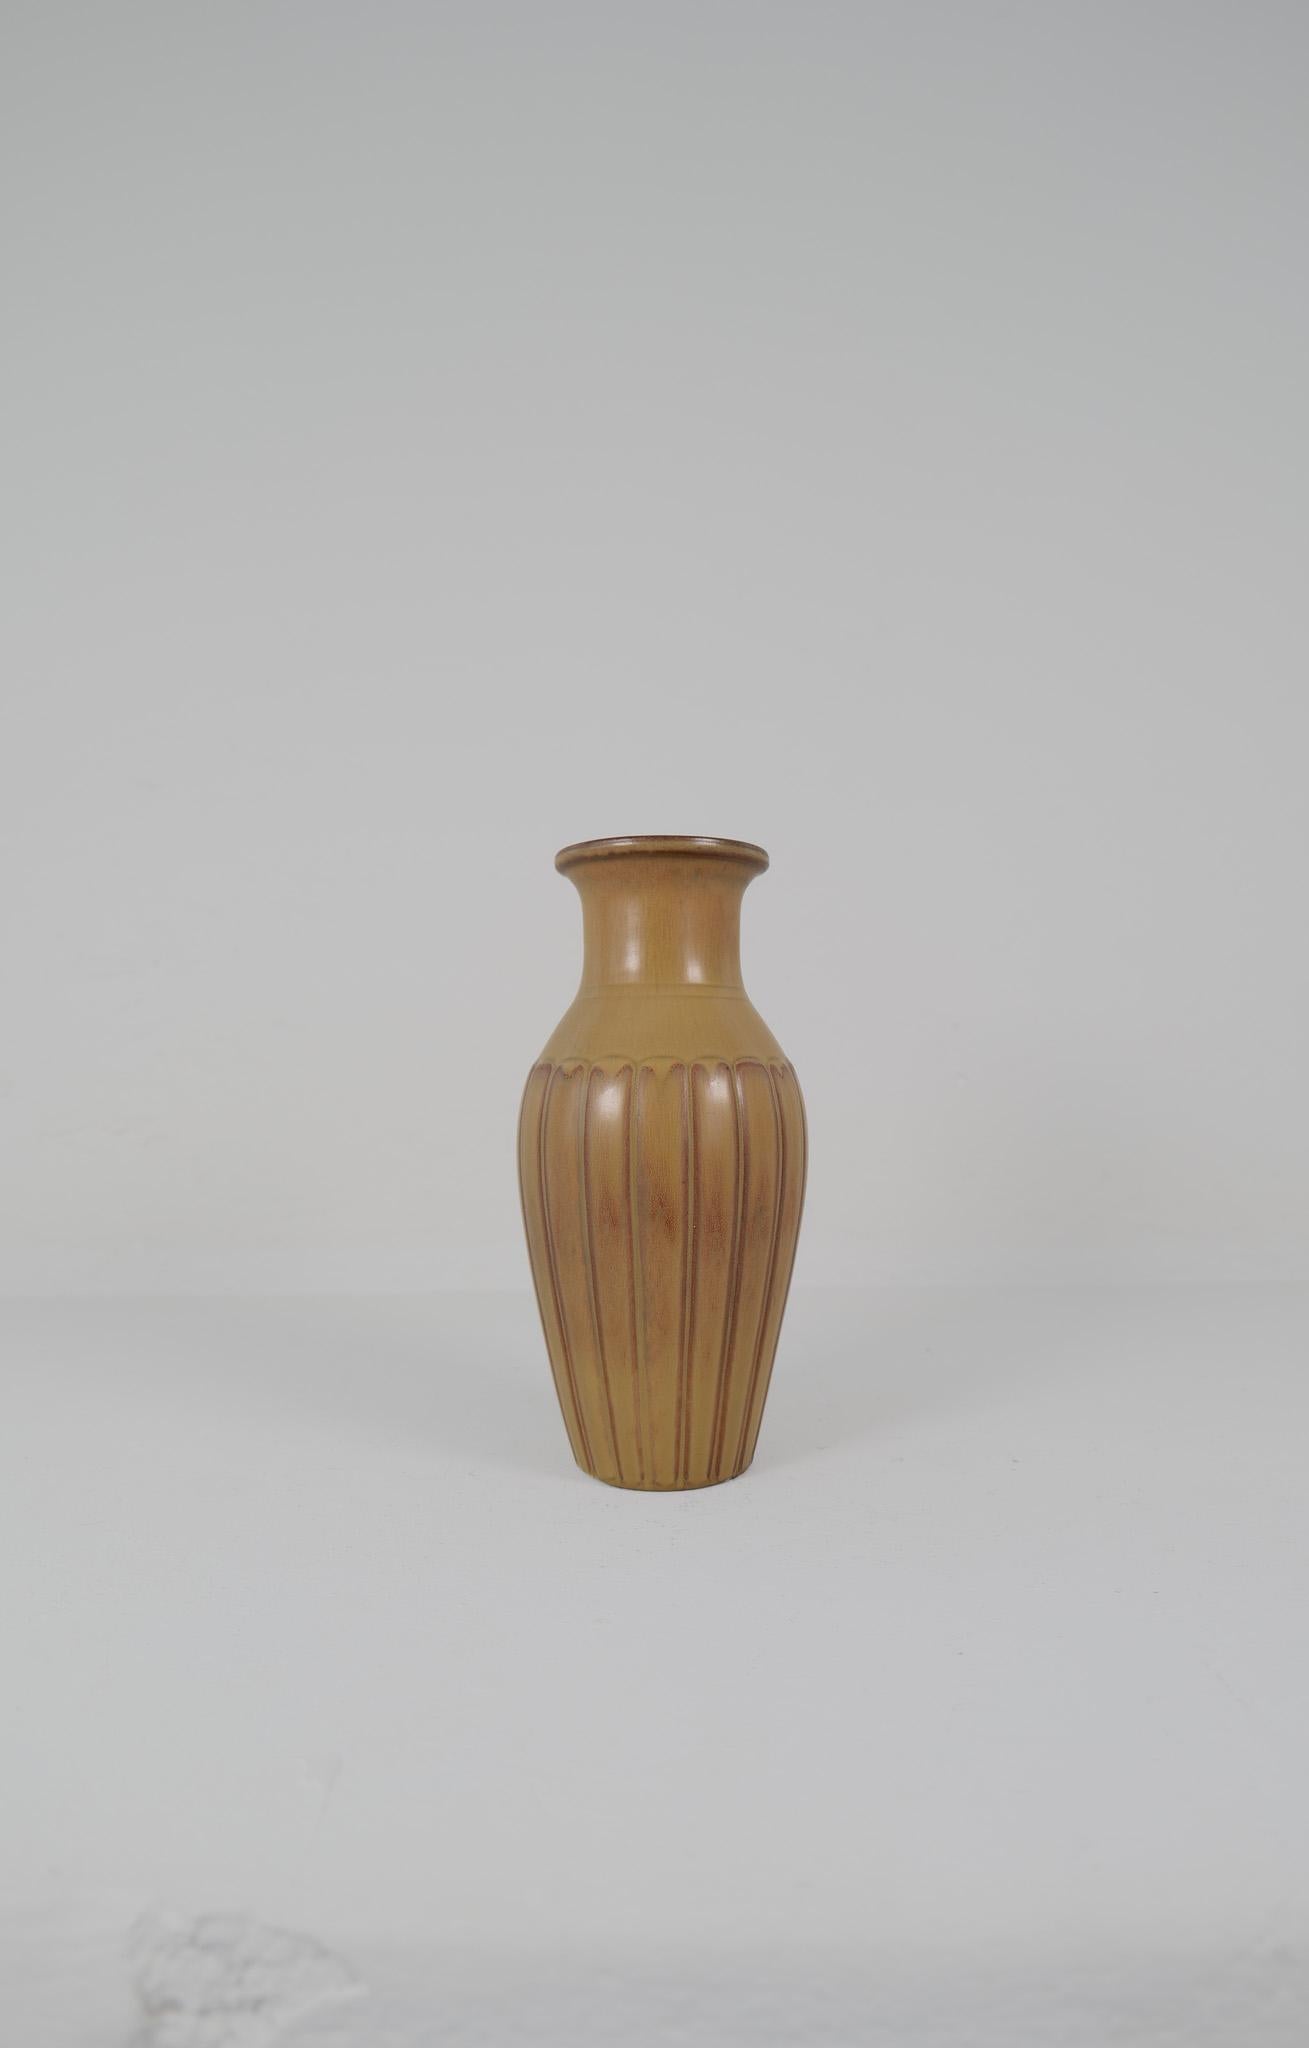 This large, unusual stoneware vase by Gunnar Nylund for Rörstrand 1950s is gifted with light brown/green/red harefur glaze. And it has that stunning look of Nylunds great craftsmanship. It really gives a great impression. 

Signed Rörstrand